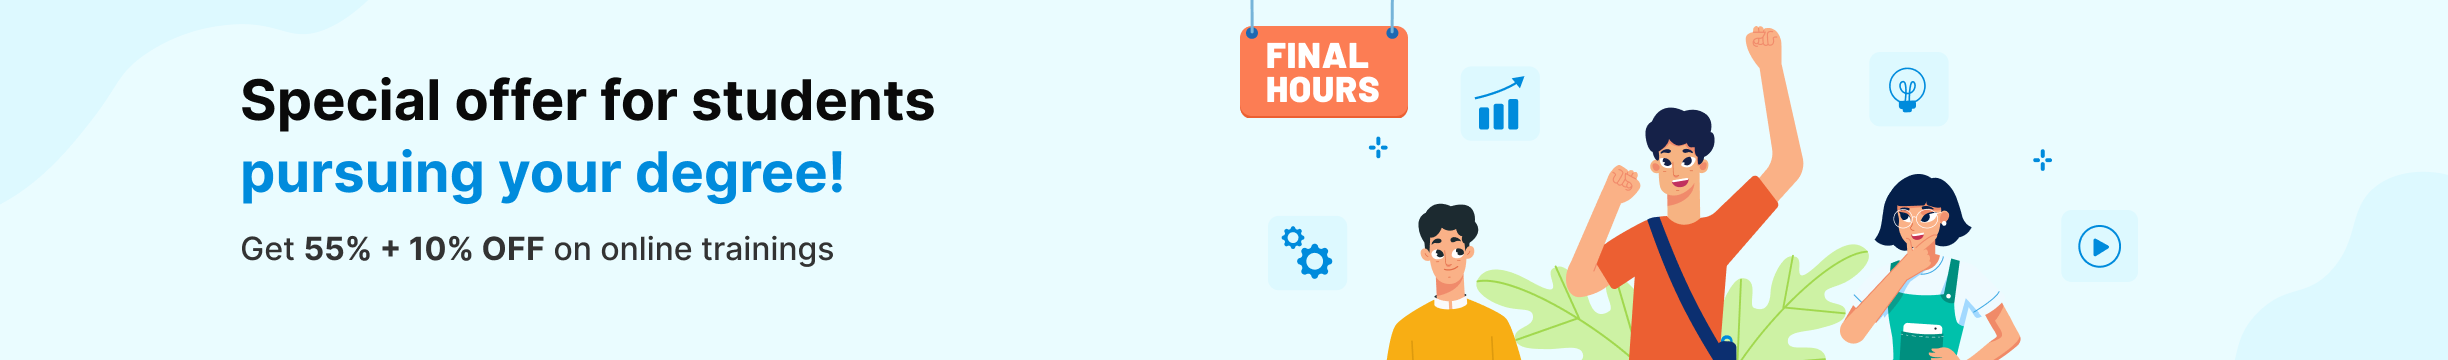 branch_specific-final-hours